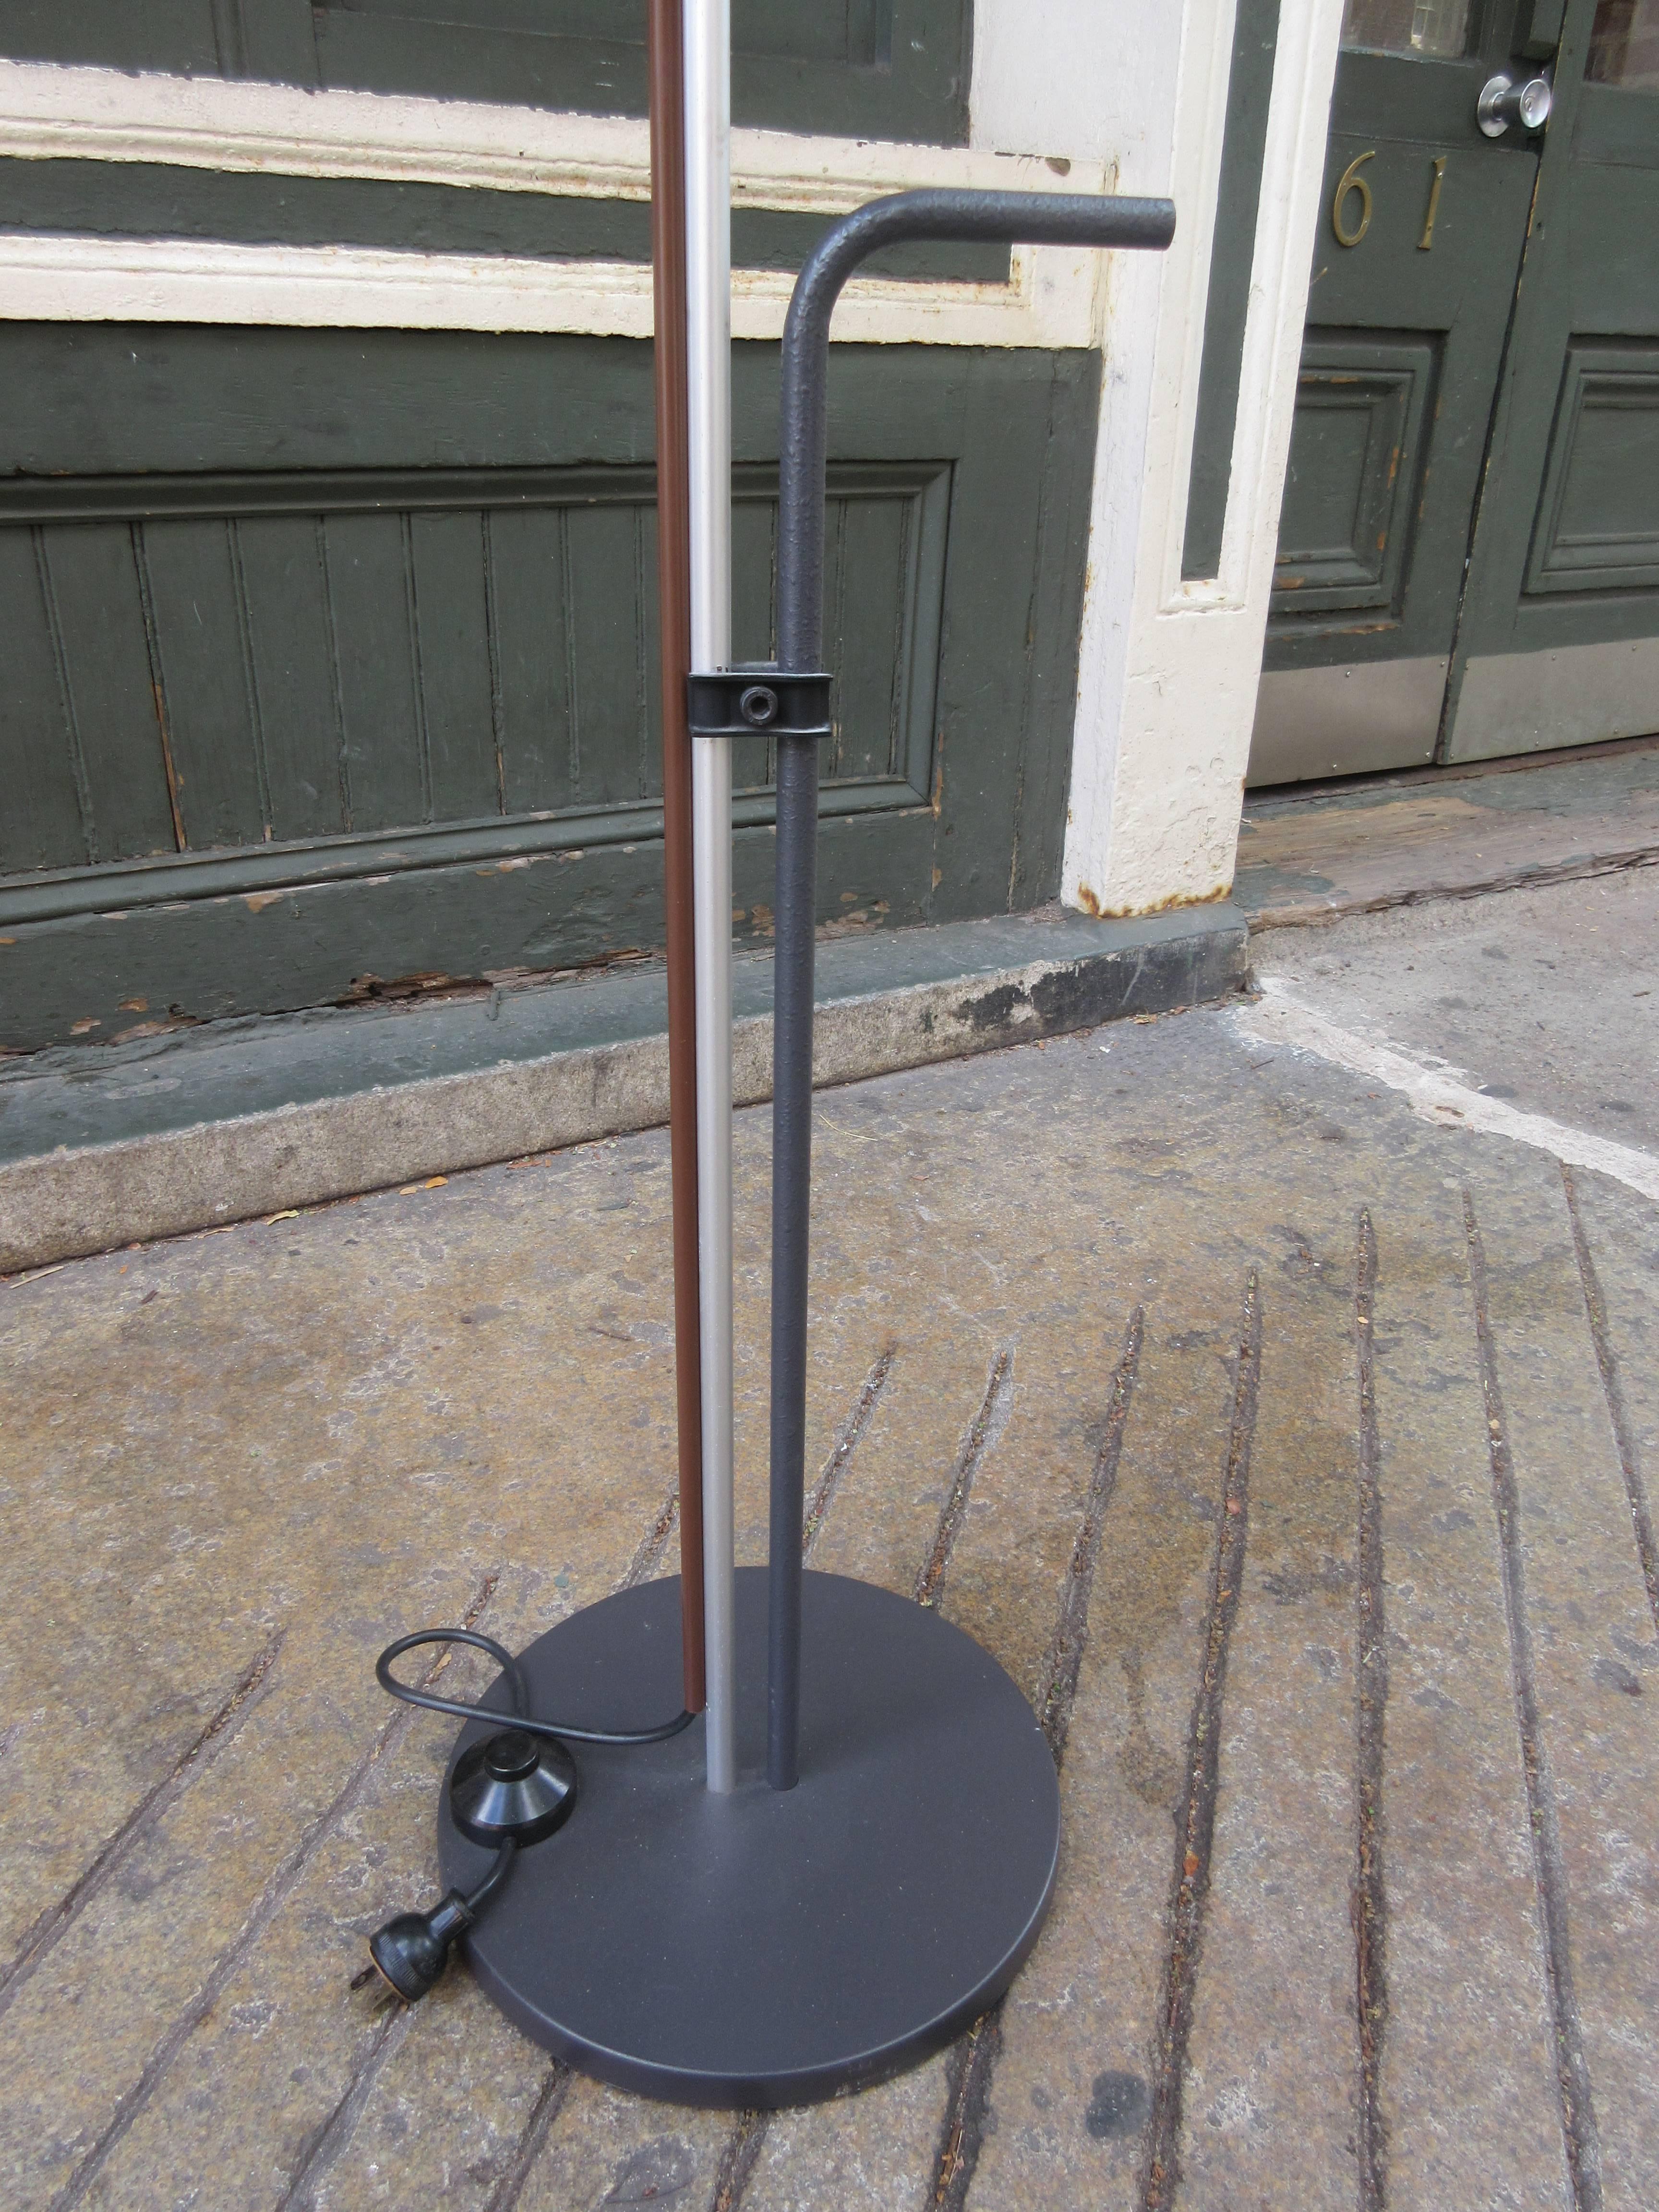 Adjustable floor lamp with gray plastic shade and umbrella handle for lifting. Retains label and is perfect.